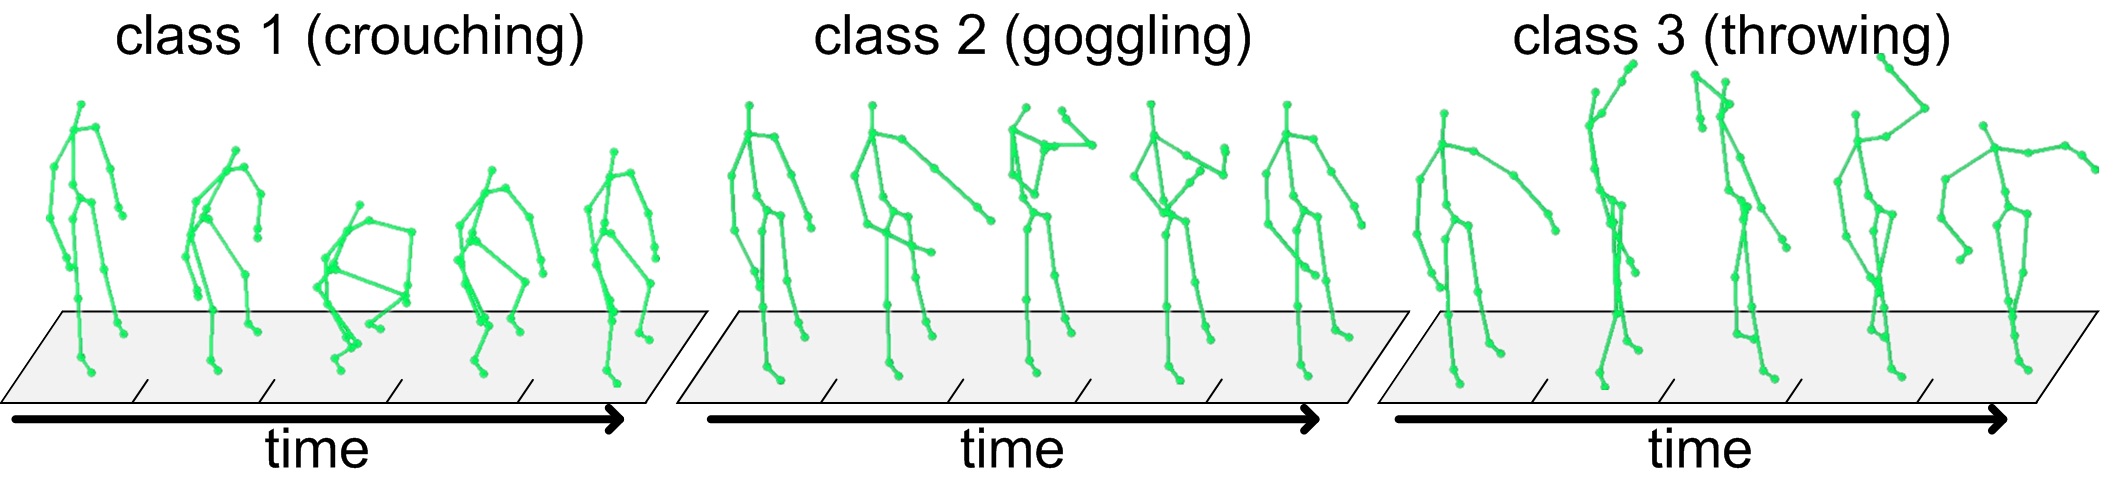 Skeleton-based Human Action Recognition demonstration, with three images showing a skeletal figure crouching, goggling and throwing over time.